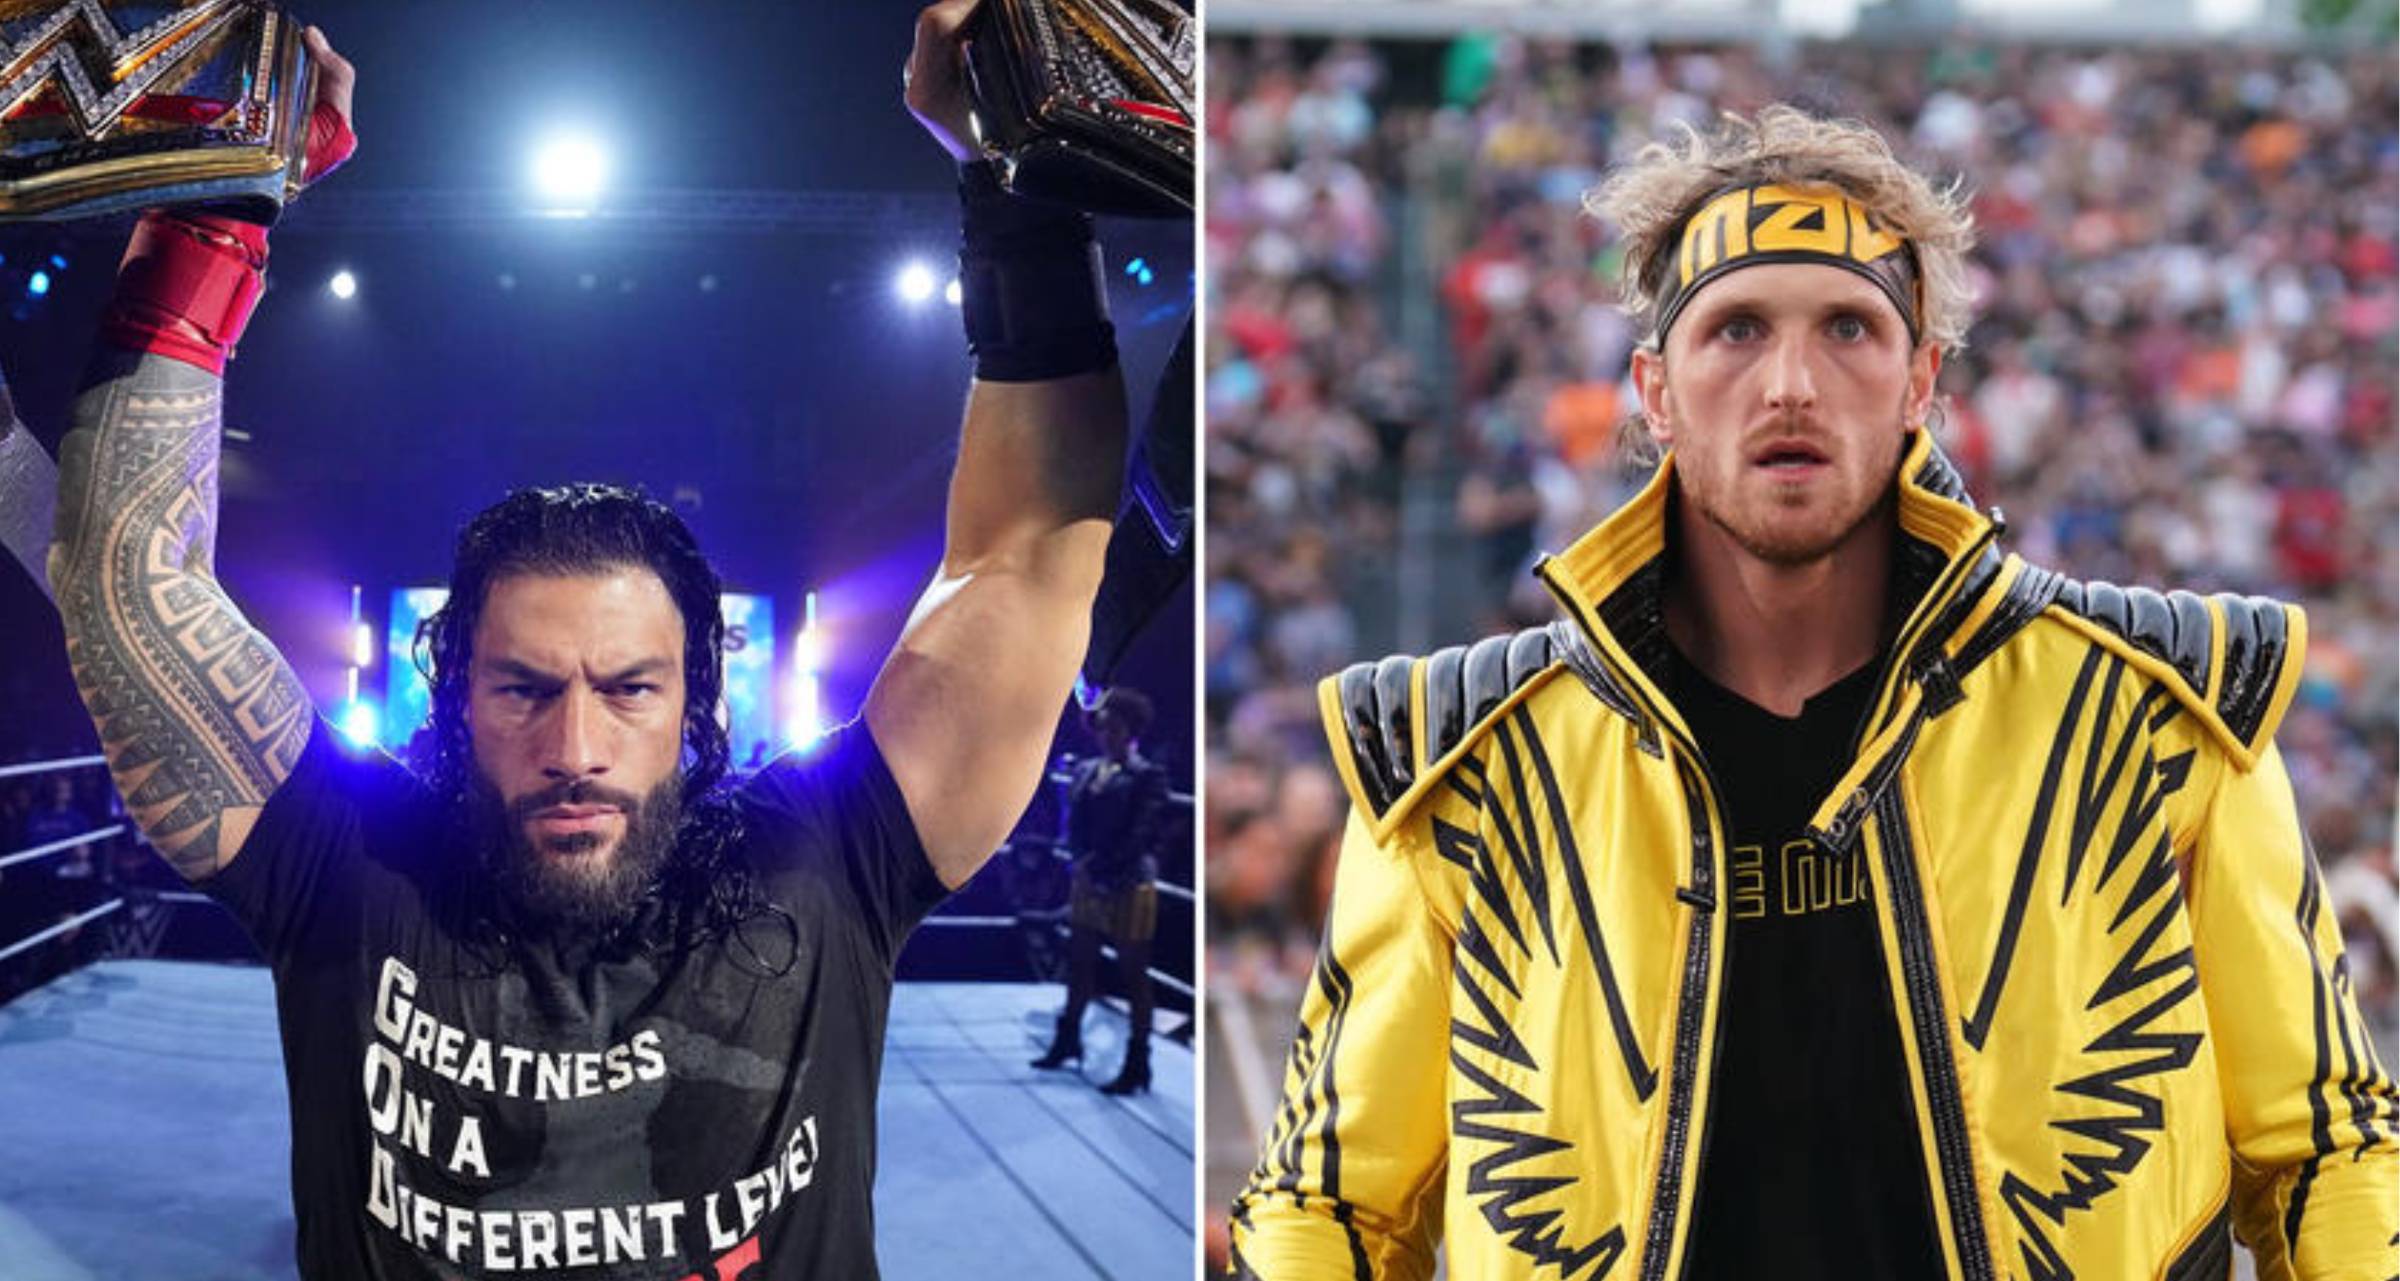 Roman Reigns and Logan Paul could be set to feud in WWE